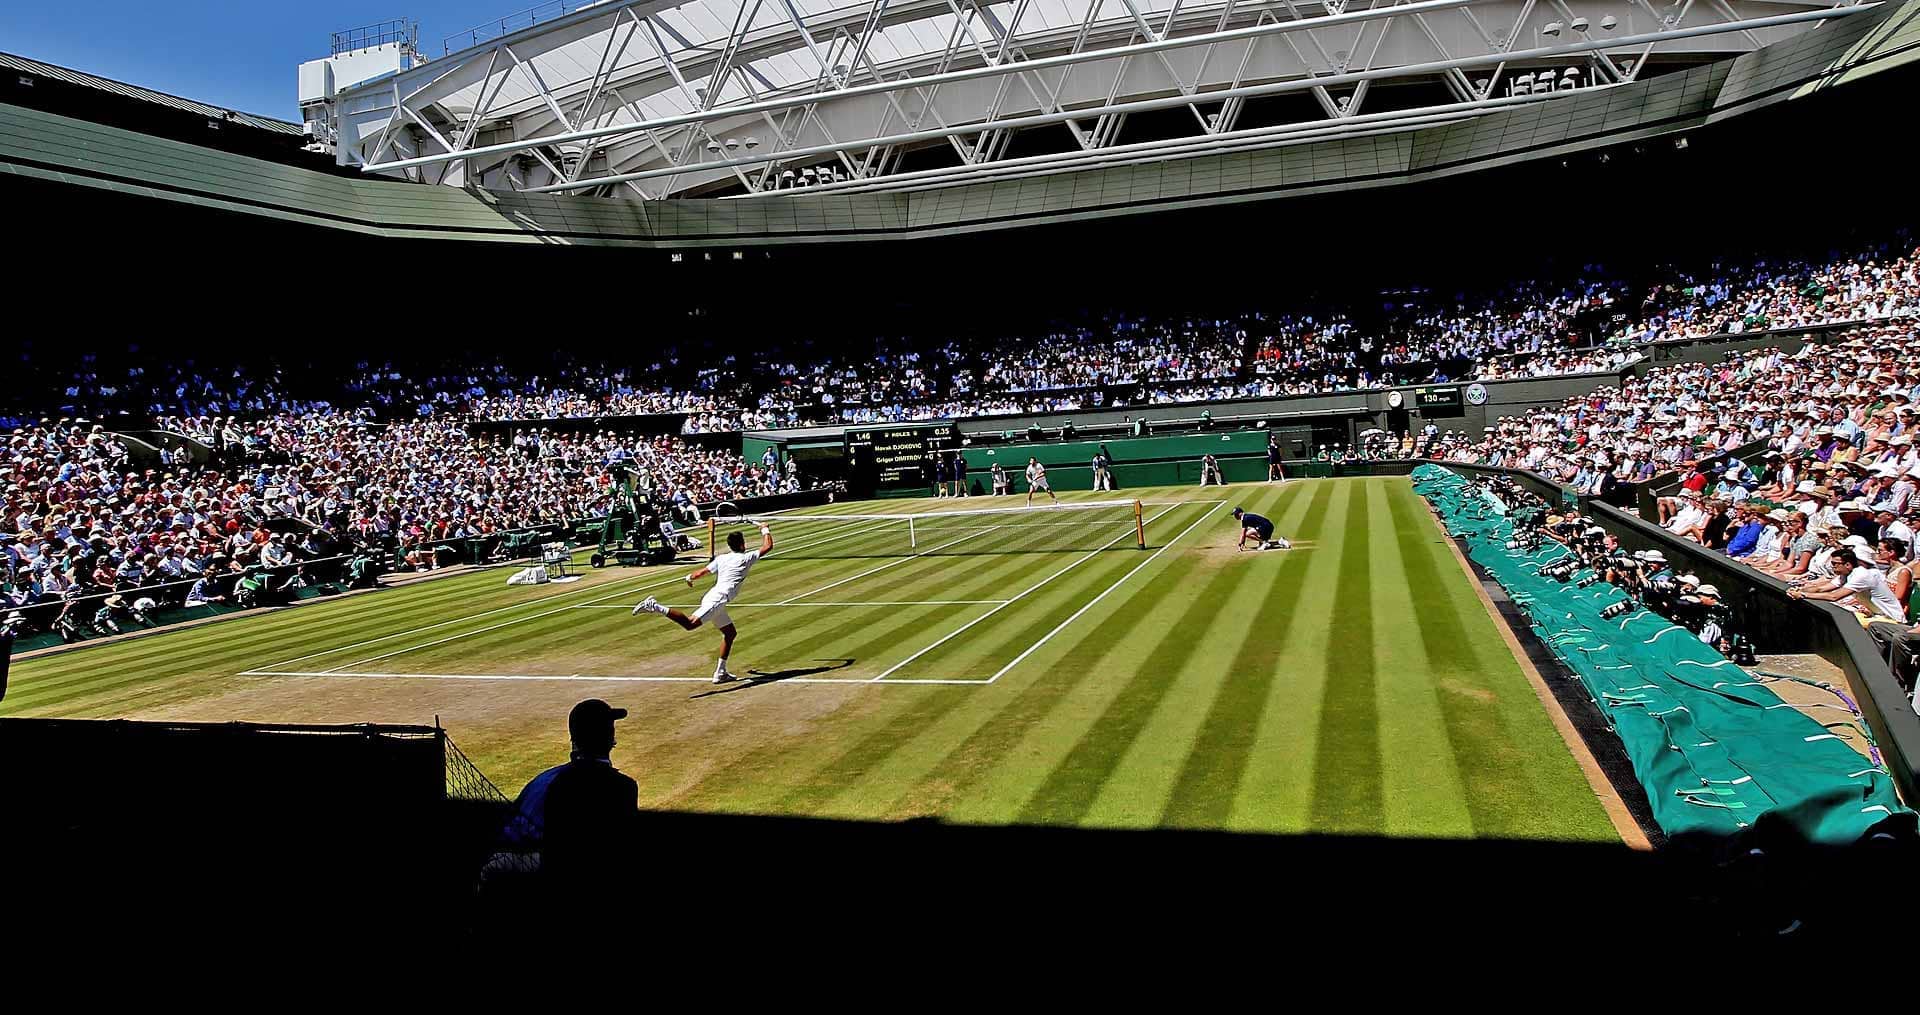 Experience Wimbledon's history, heritage and traditions